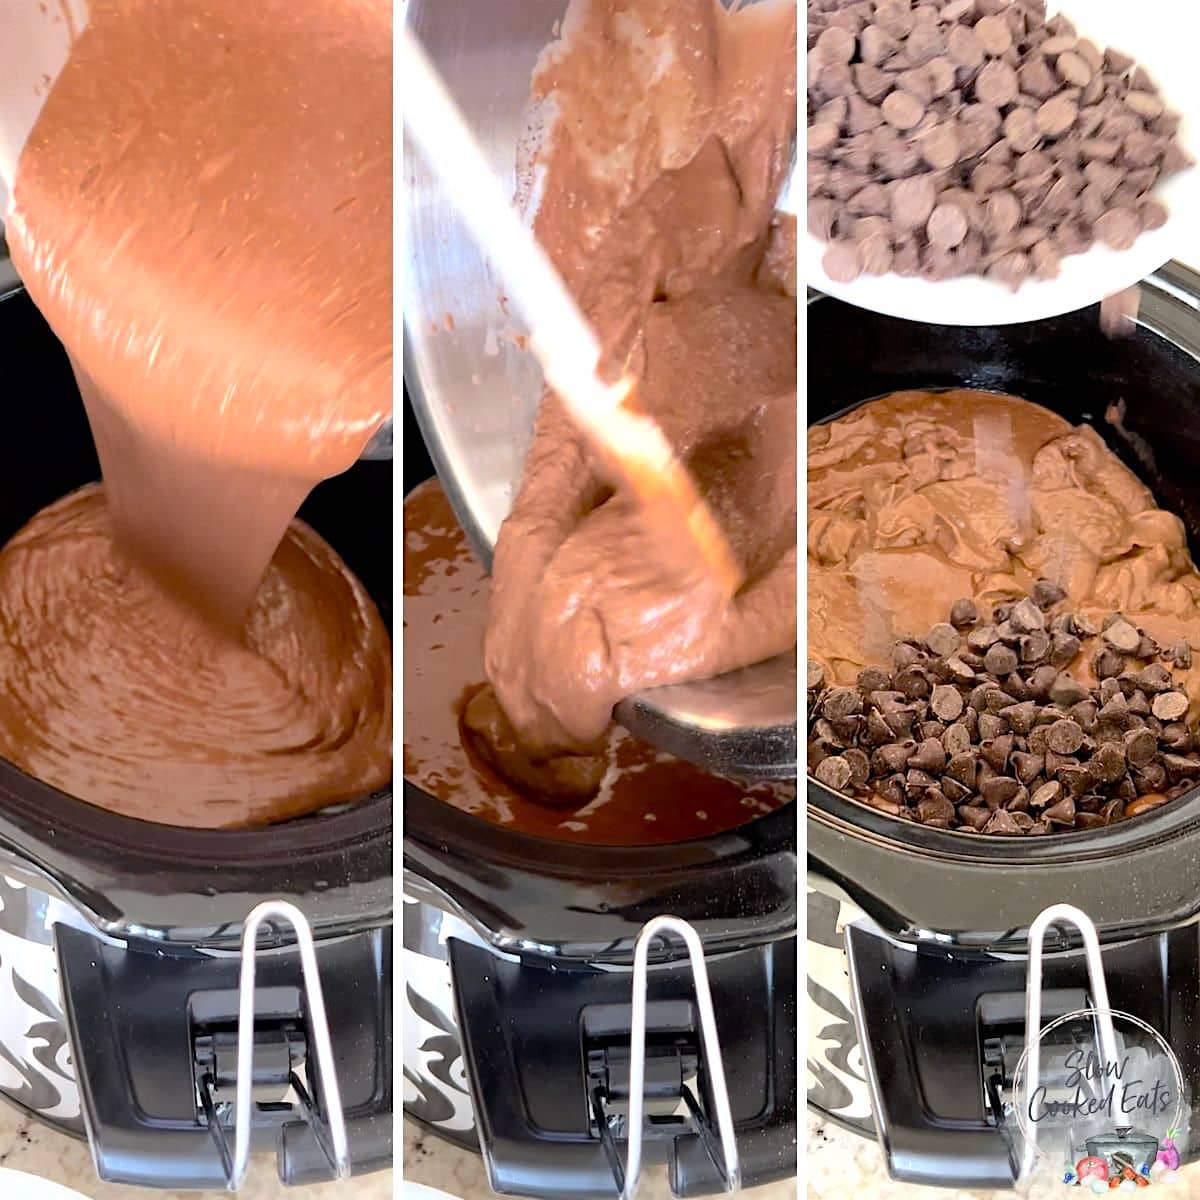 Adding the molten lava cake batter then pudding ending with chocolate chips.